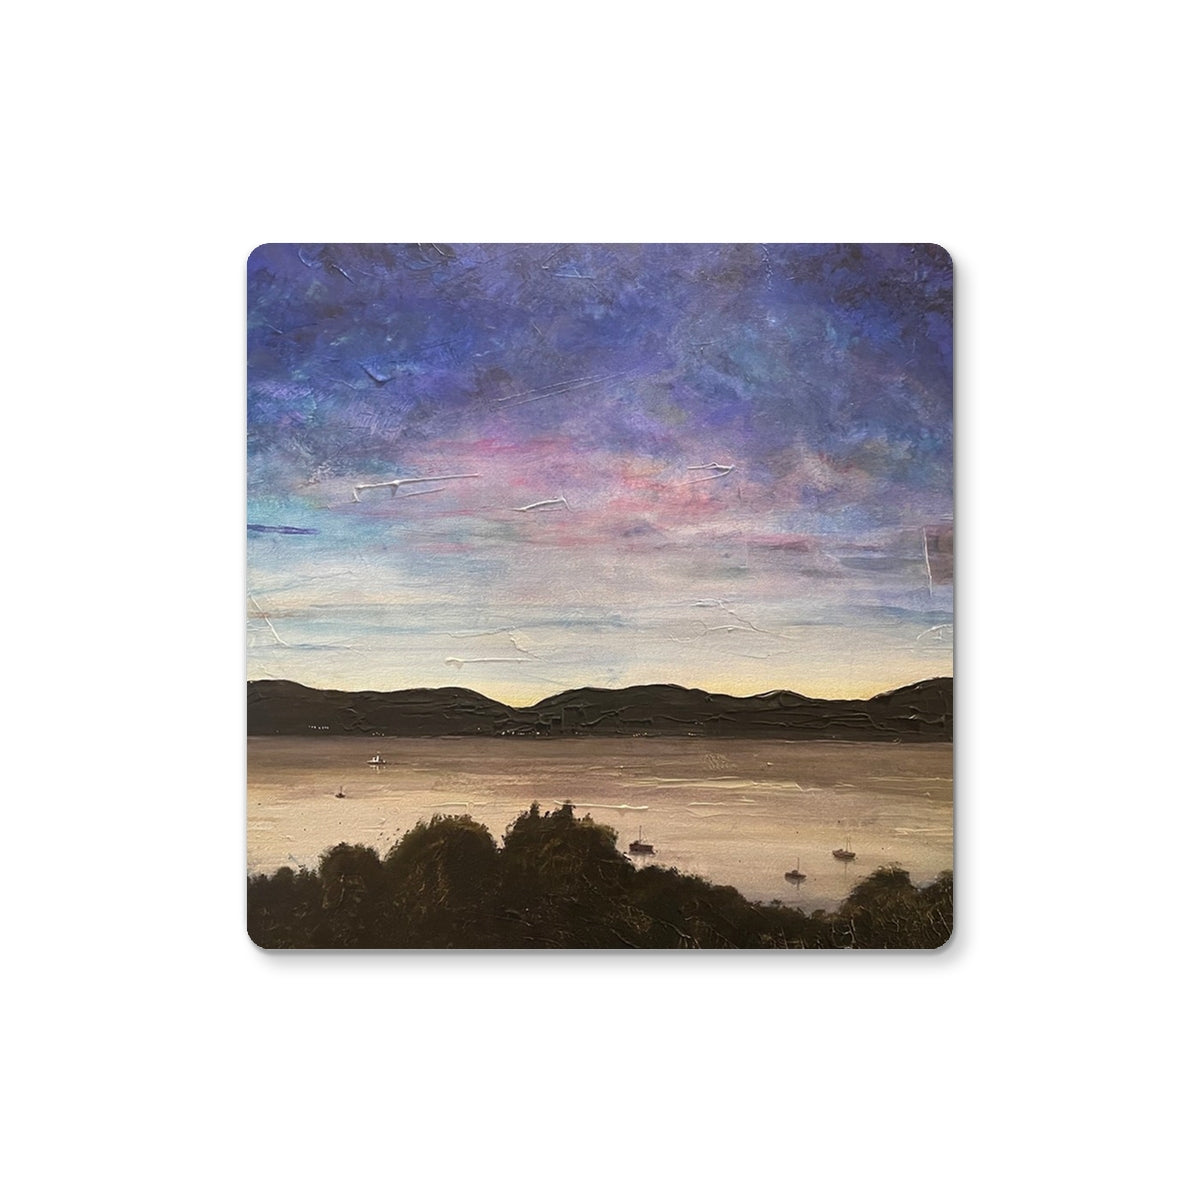 River Clyde Twilight Art Gifts Coaster-Homeware-River Clyde Art Gallery-2 Coasters-Paintings, Prints, Homeware, Art Gifts From Scotland By Scottish Artist Kevin Hunter